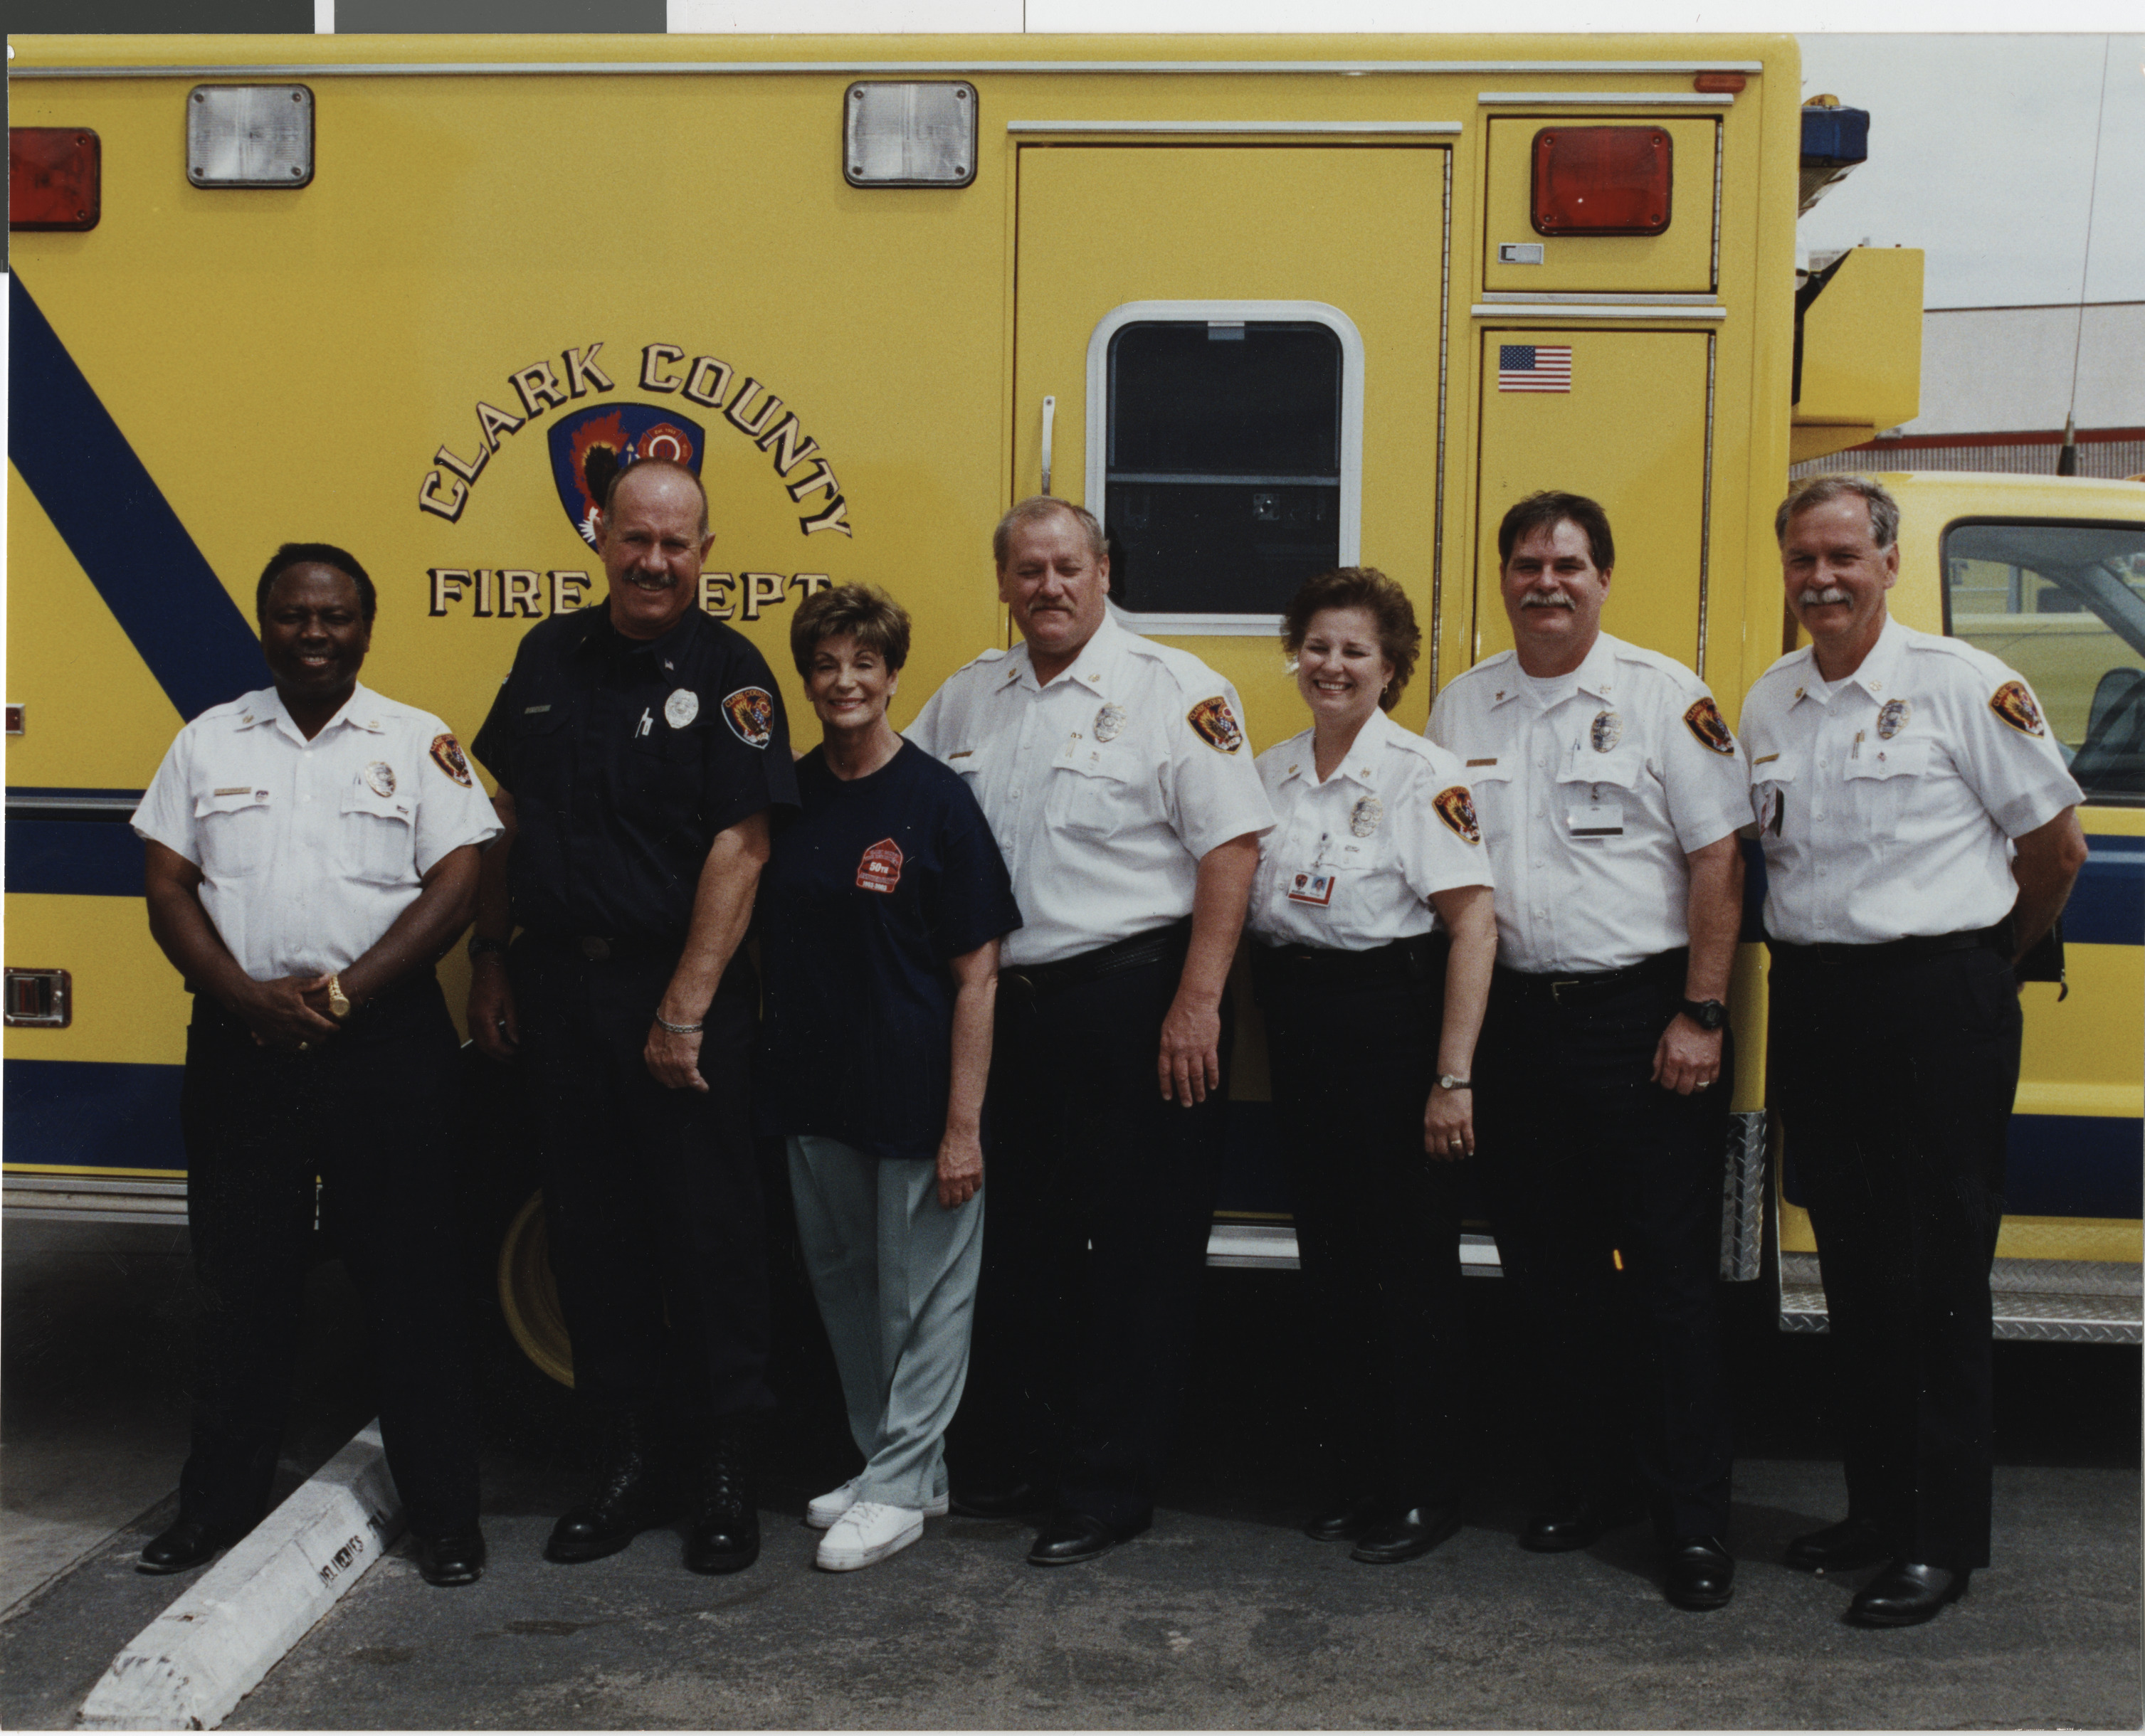 Photograph of Shelley Berkley posing with Clark County Fire Department, May 16, 2003